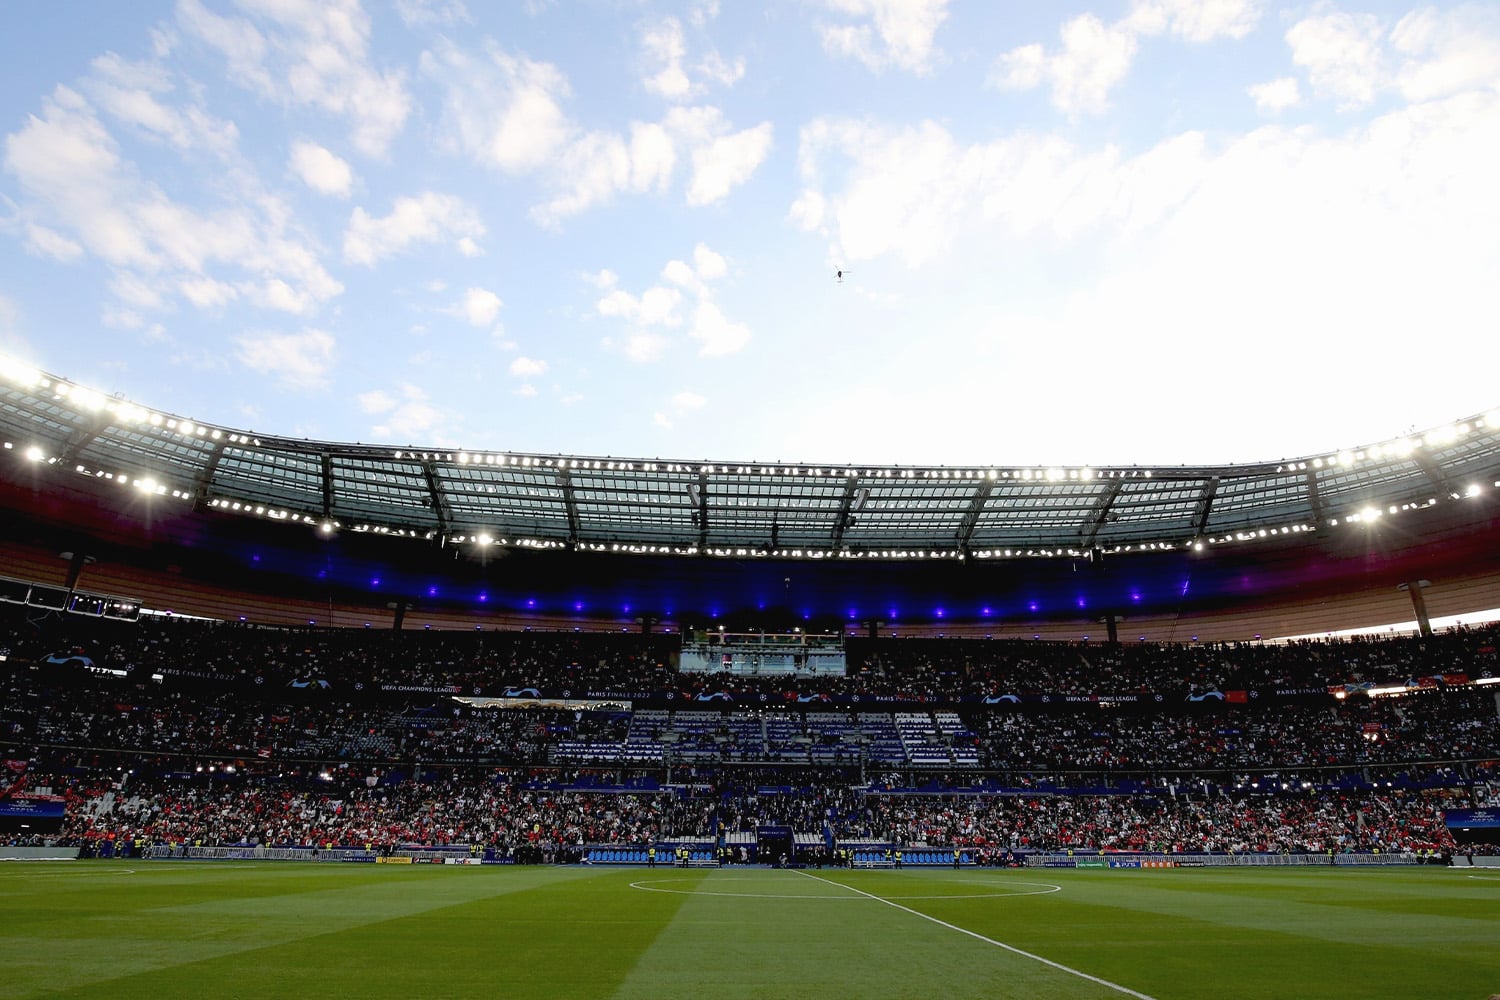 A view of the Stade de France in Paris.